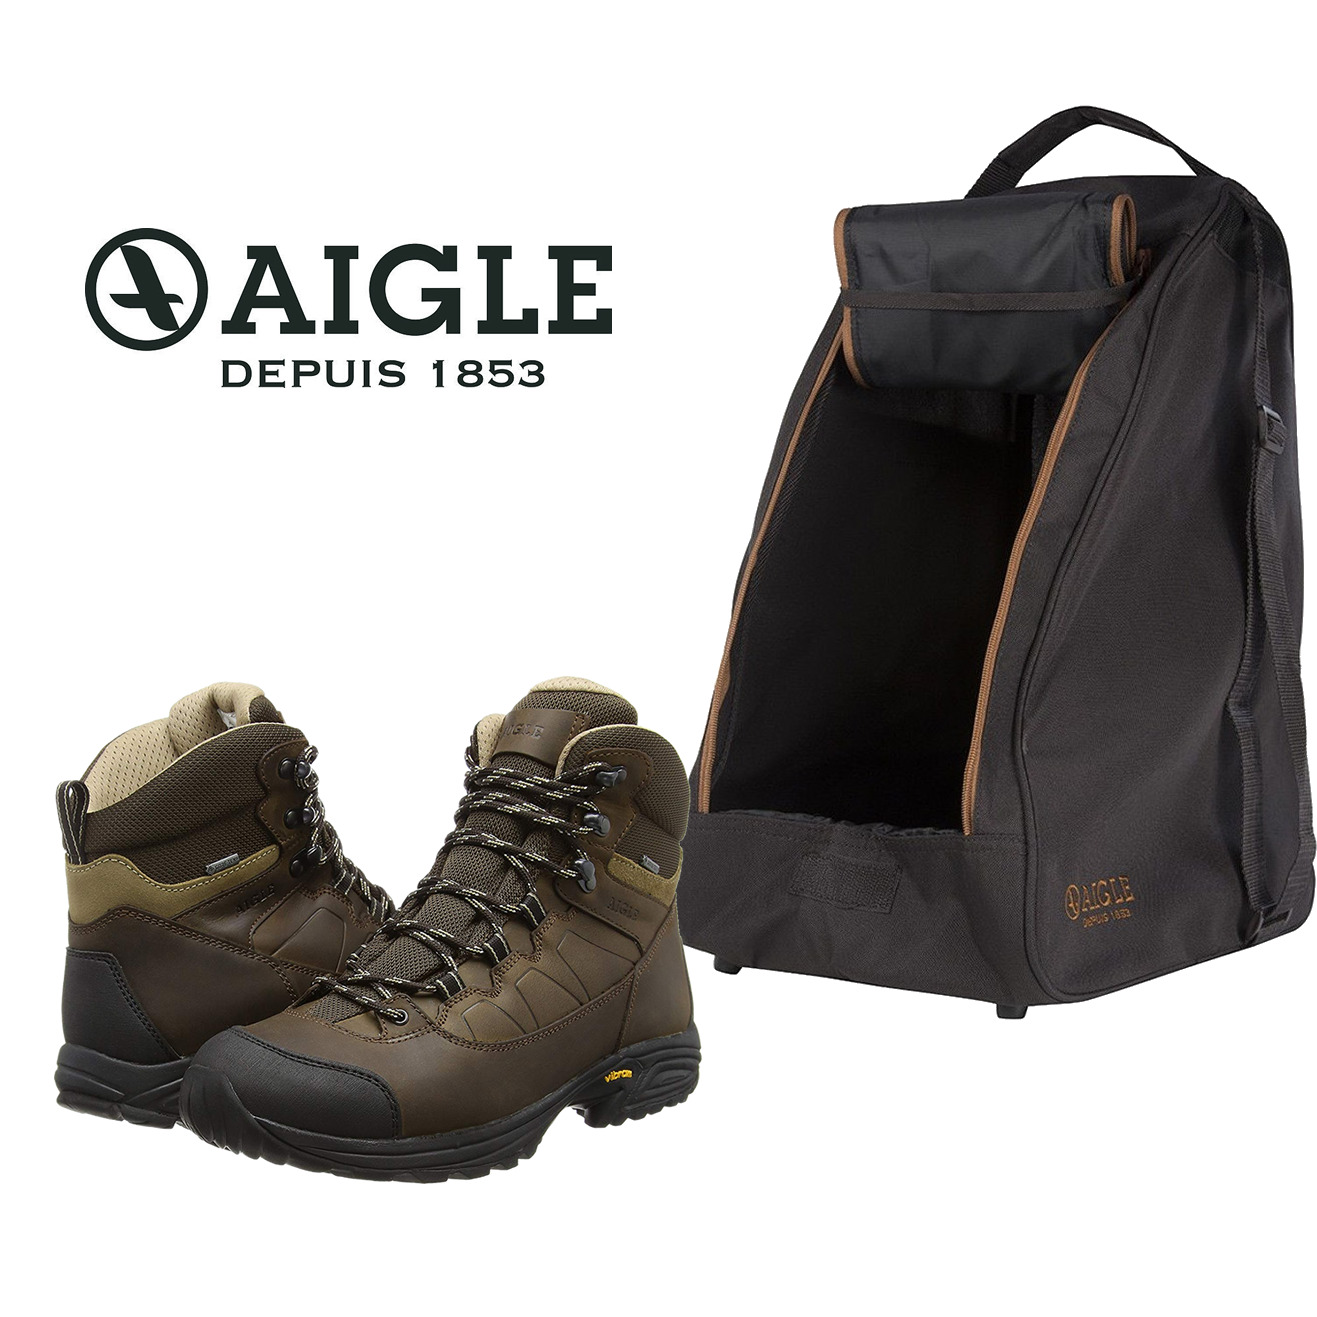 leather gore tex walking boots